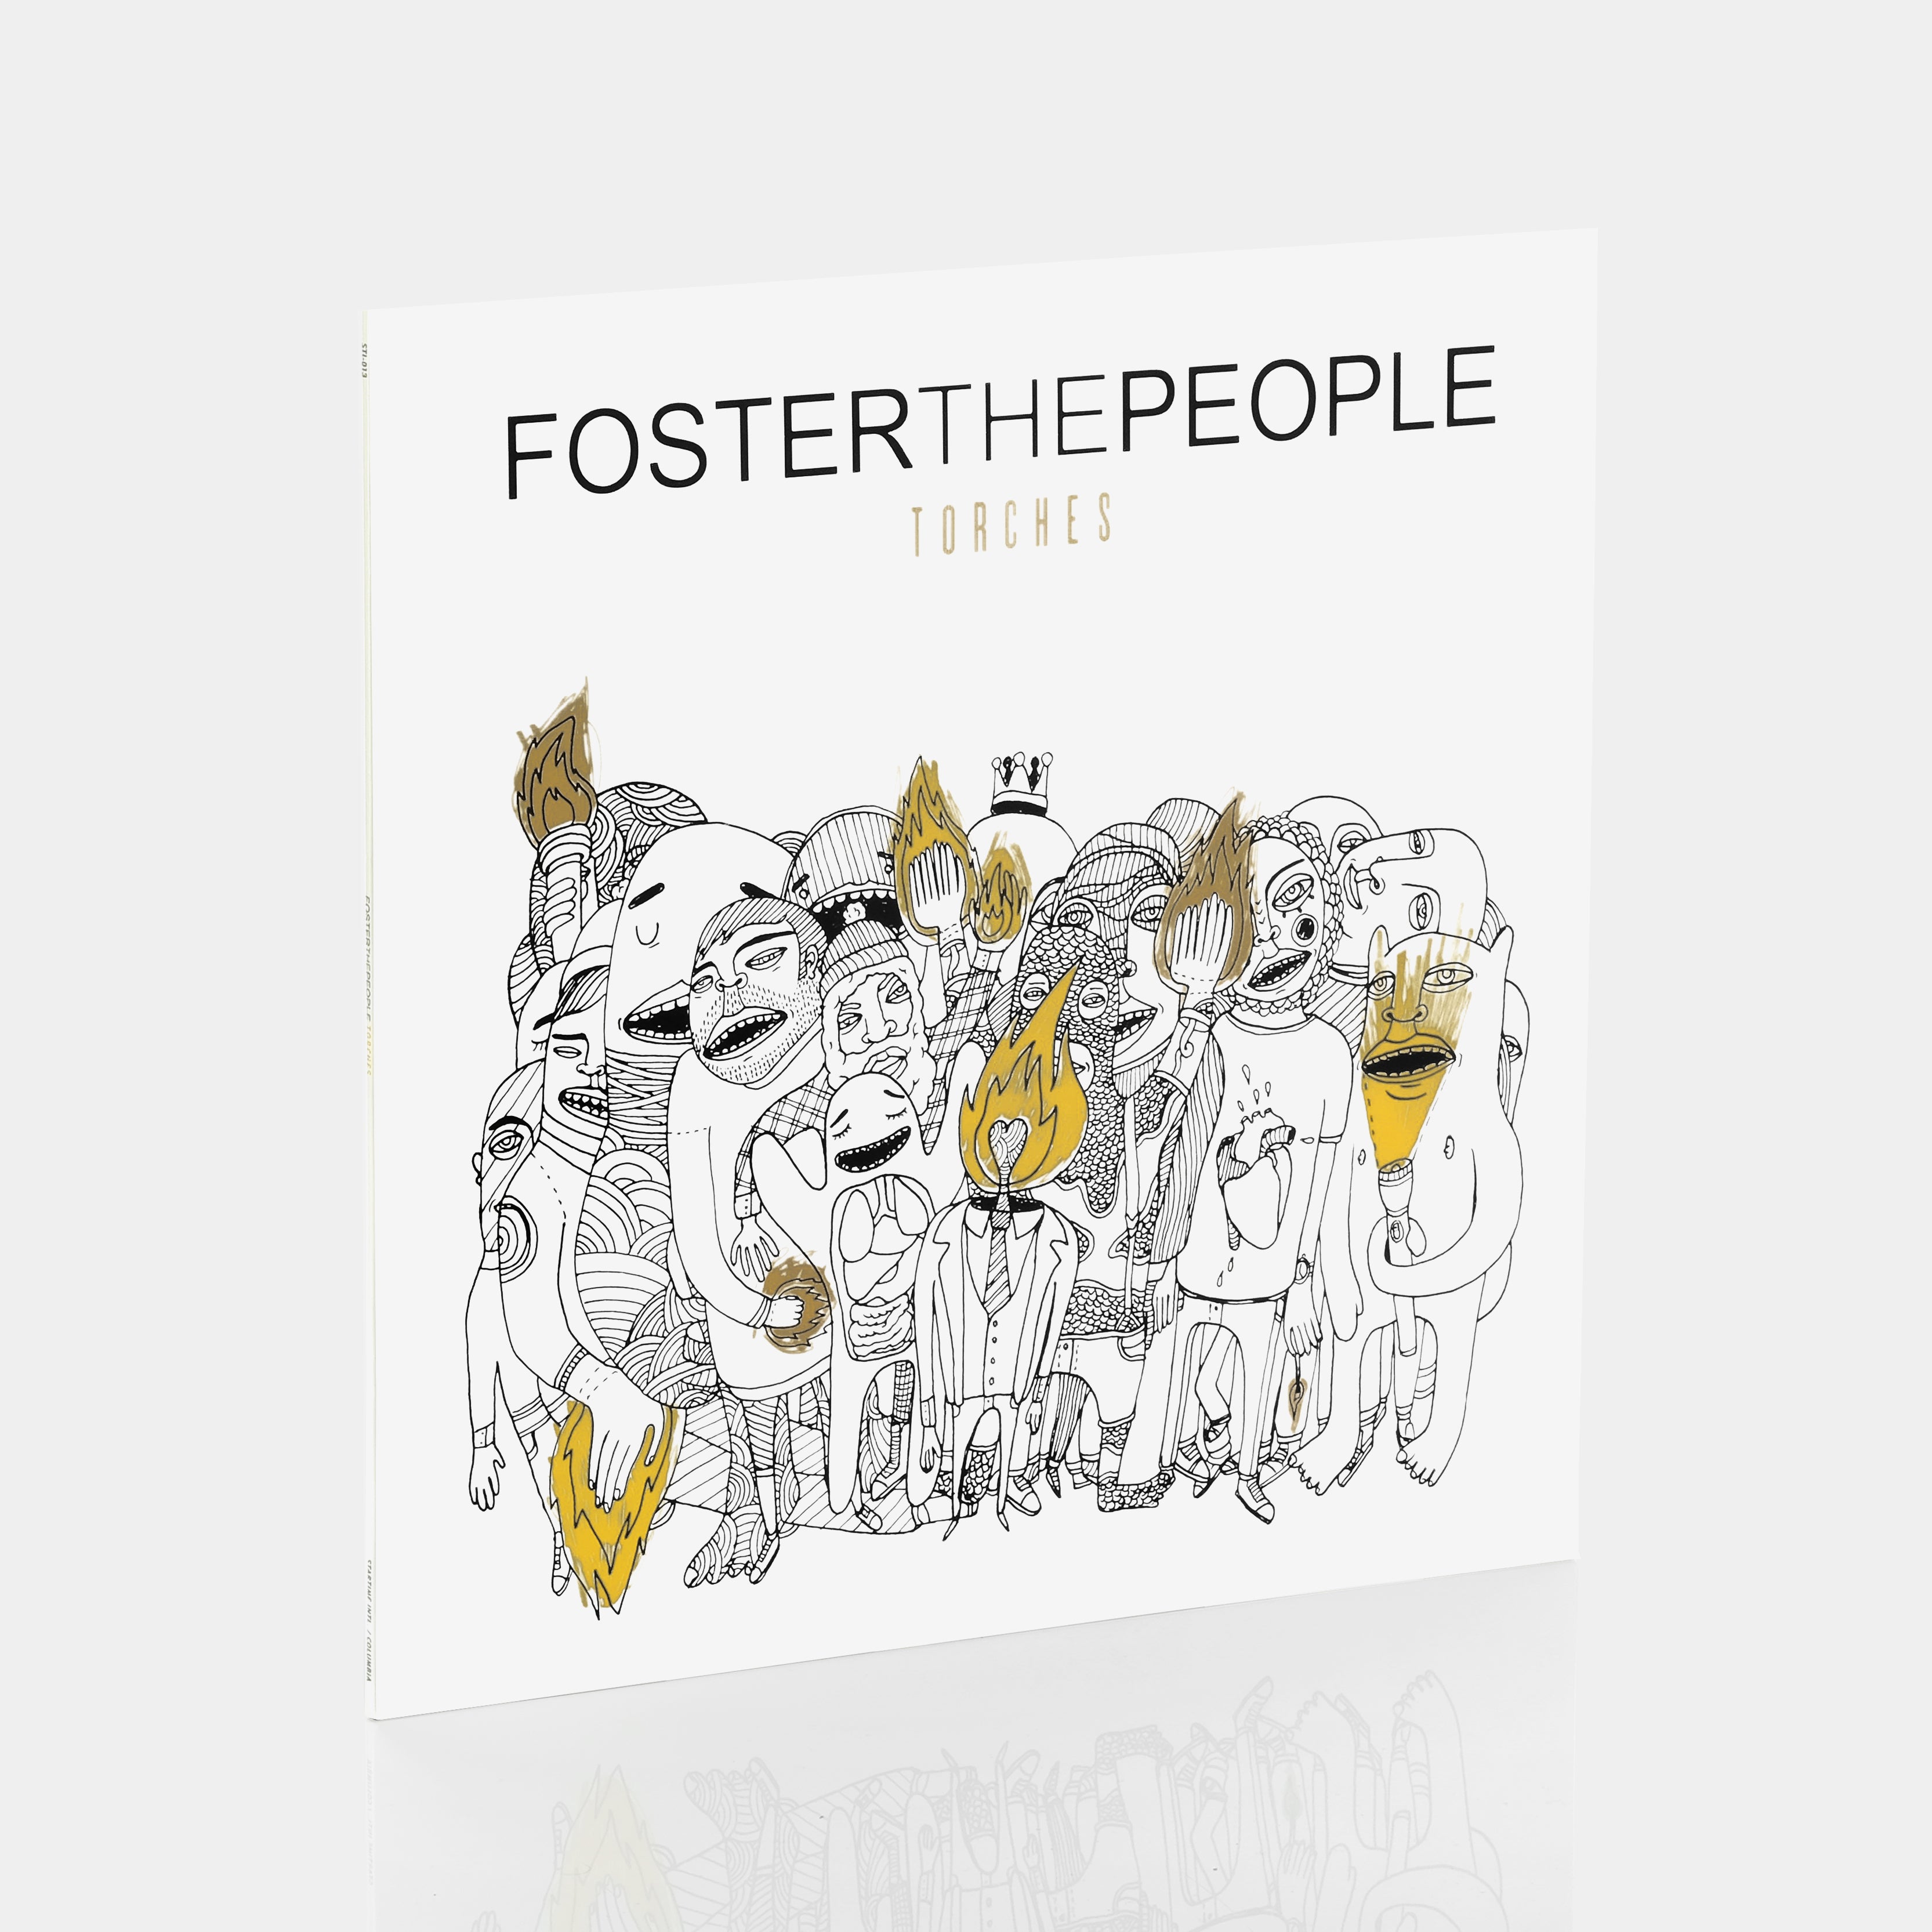 Foster The People - Torches LP Vinyl Record